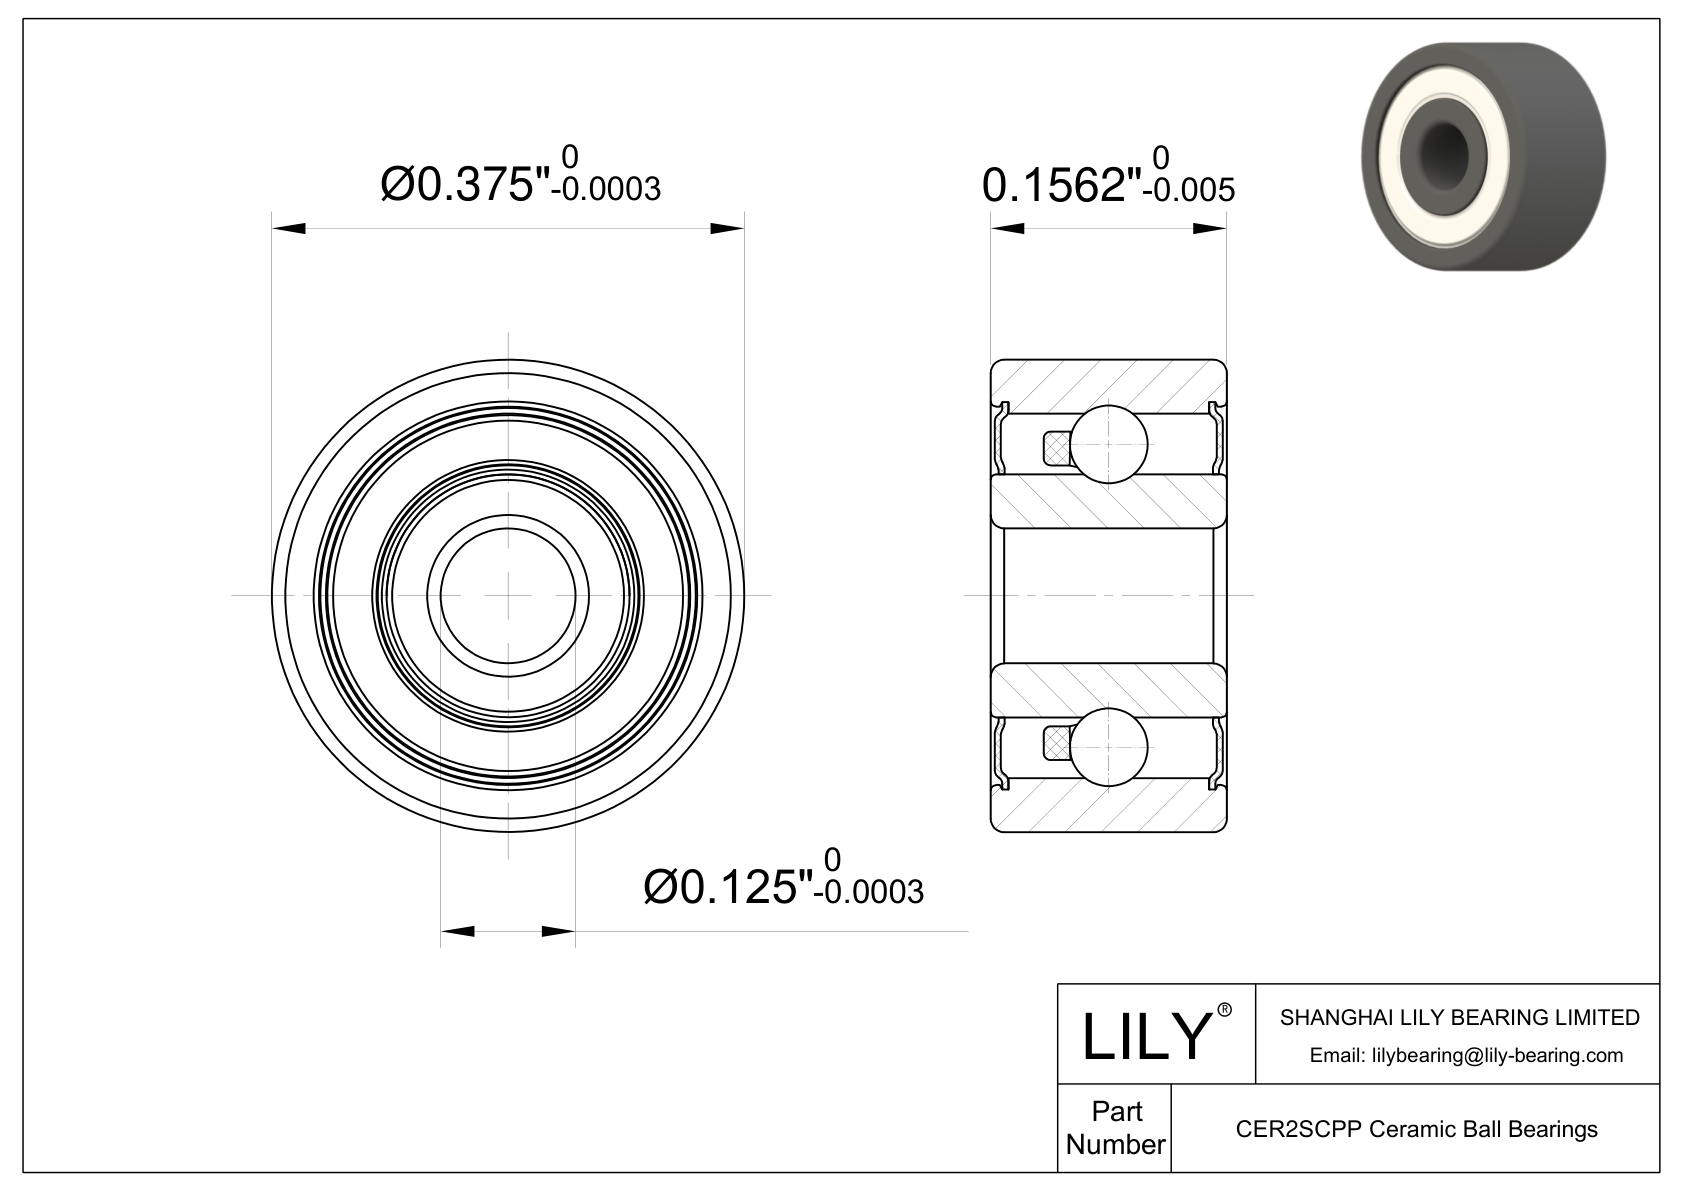 CESC R2 2RS Inch Size Silicon Carbide Ceramic Bearings cad drawing